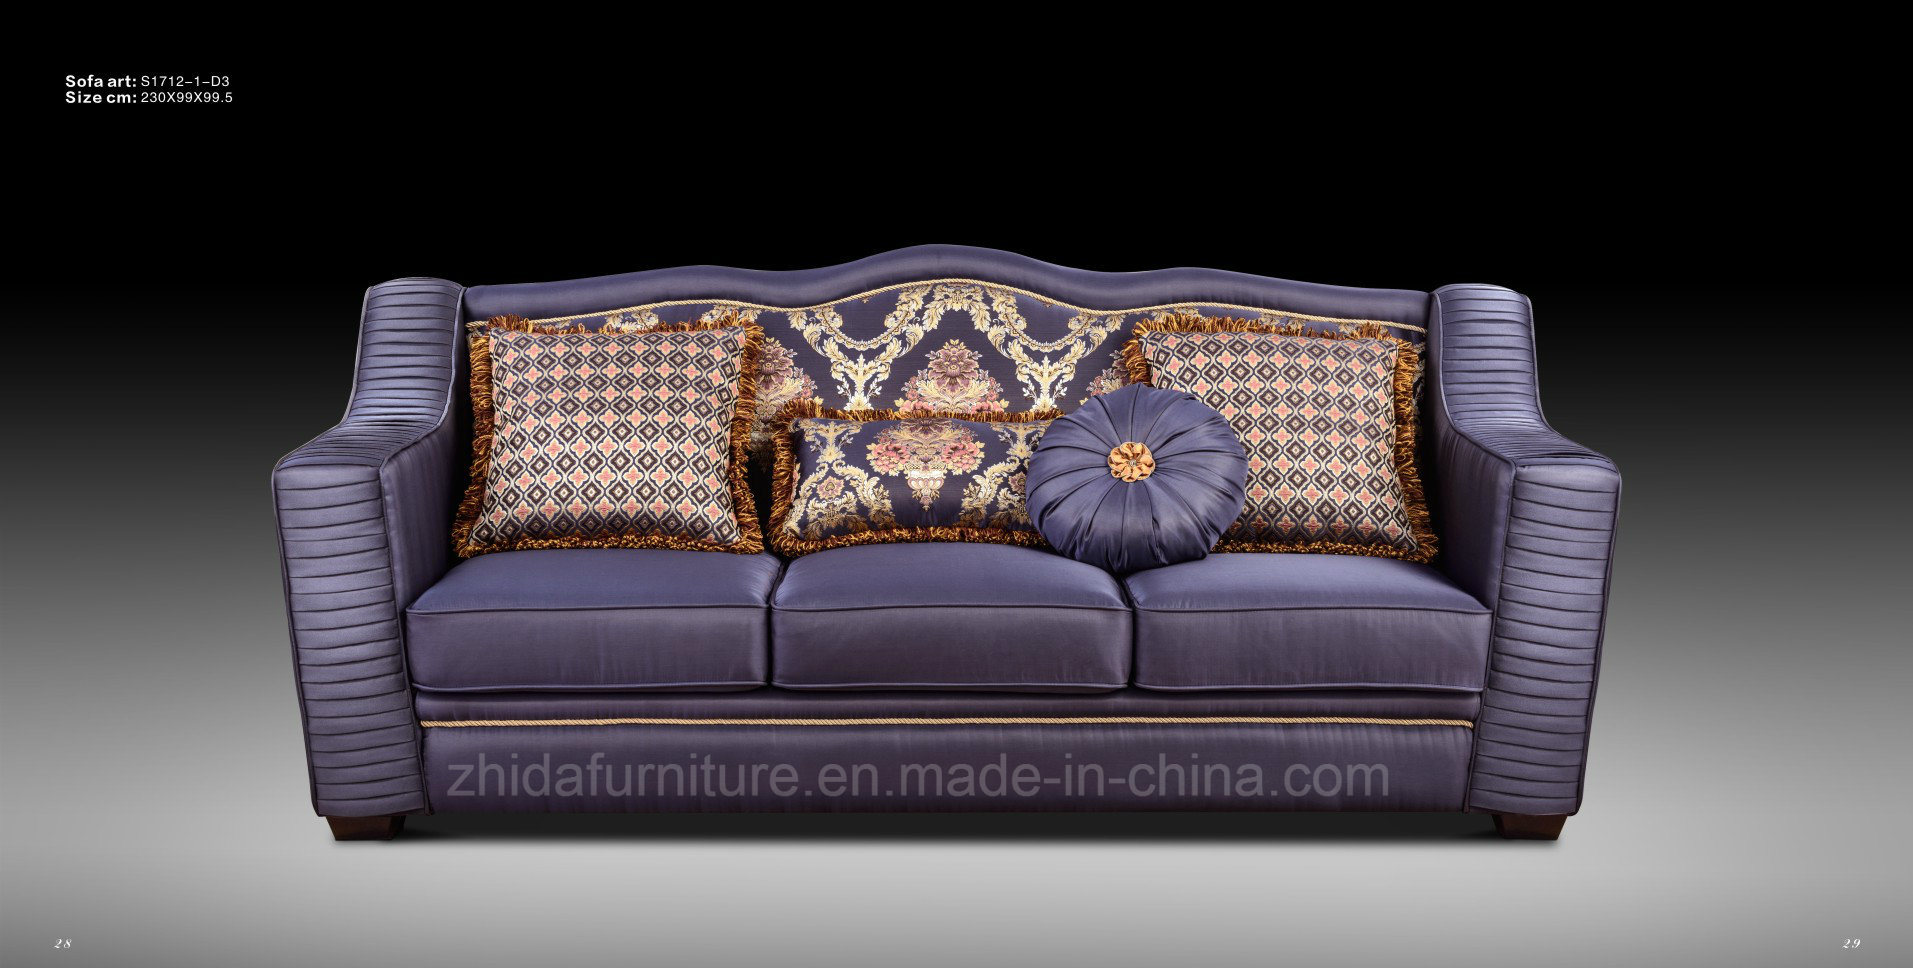 China Products/Suppliers. Living Room Furniture Sofa with Fabric Sofa